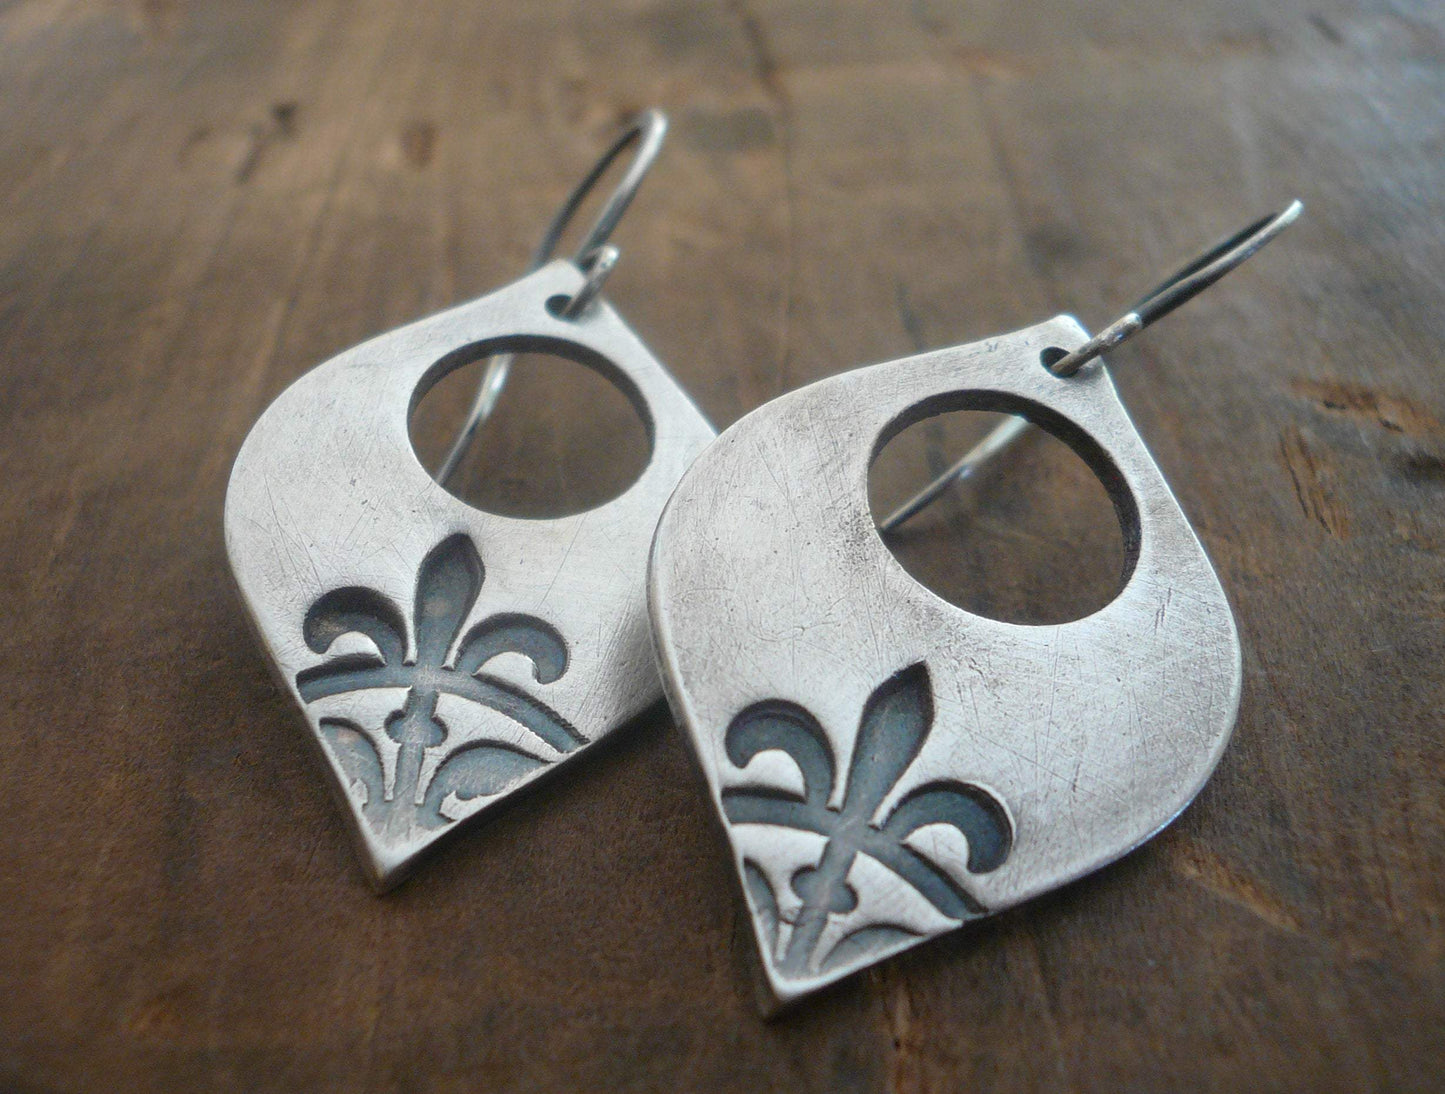 Creole Collection Earrings- Oxidized Sterling and Fine Silver Dangle Earrings. Handmade.